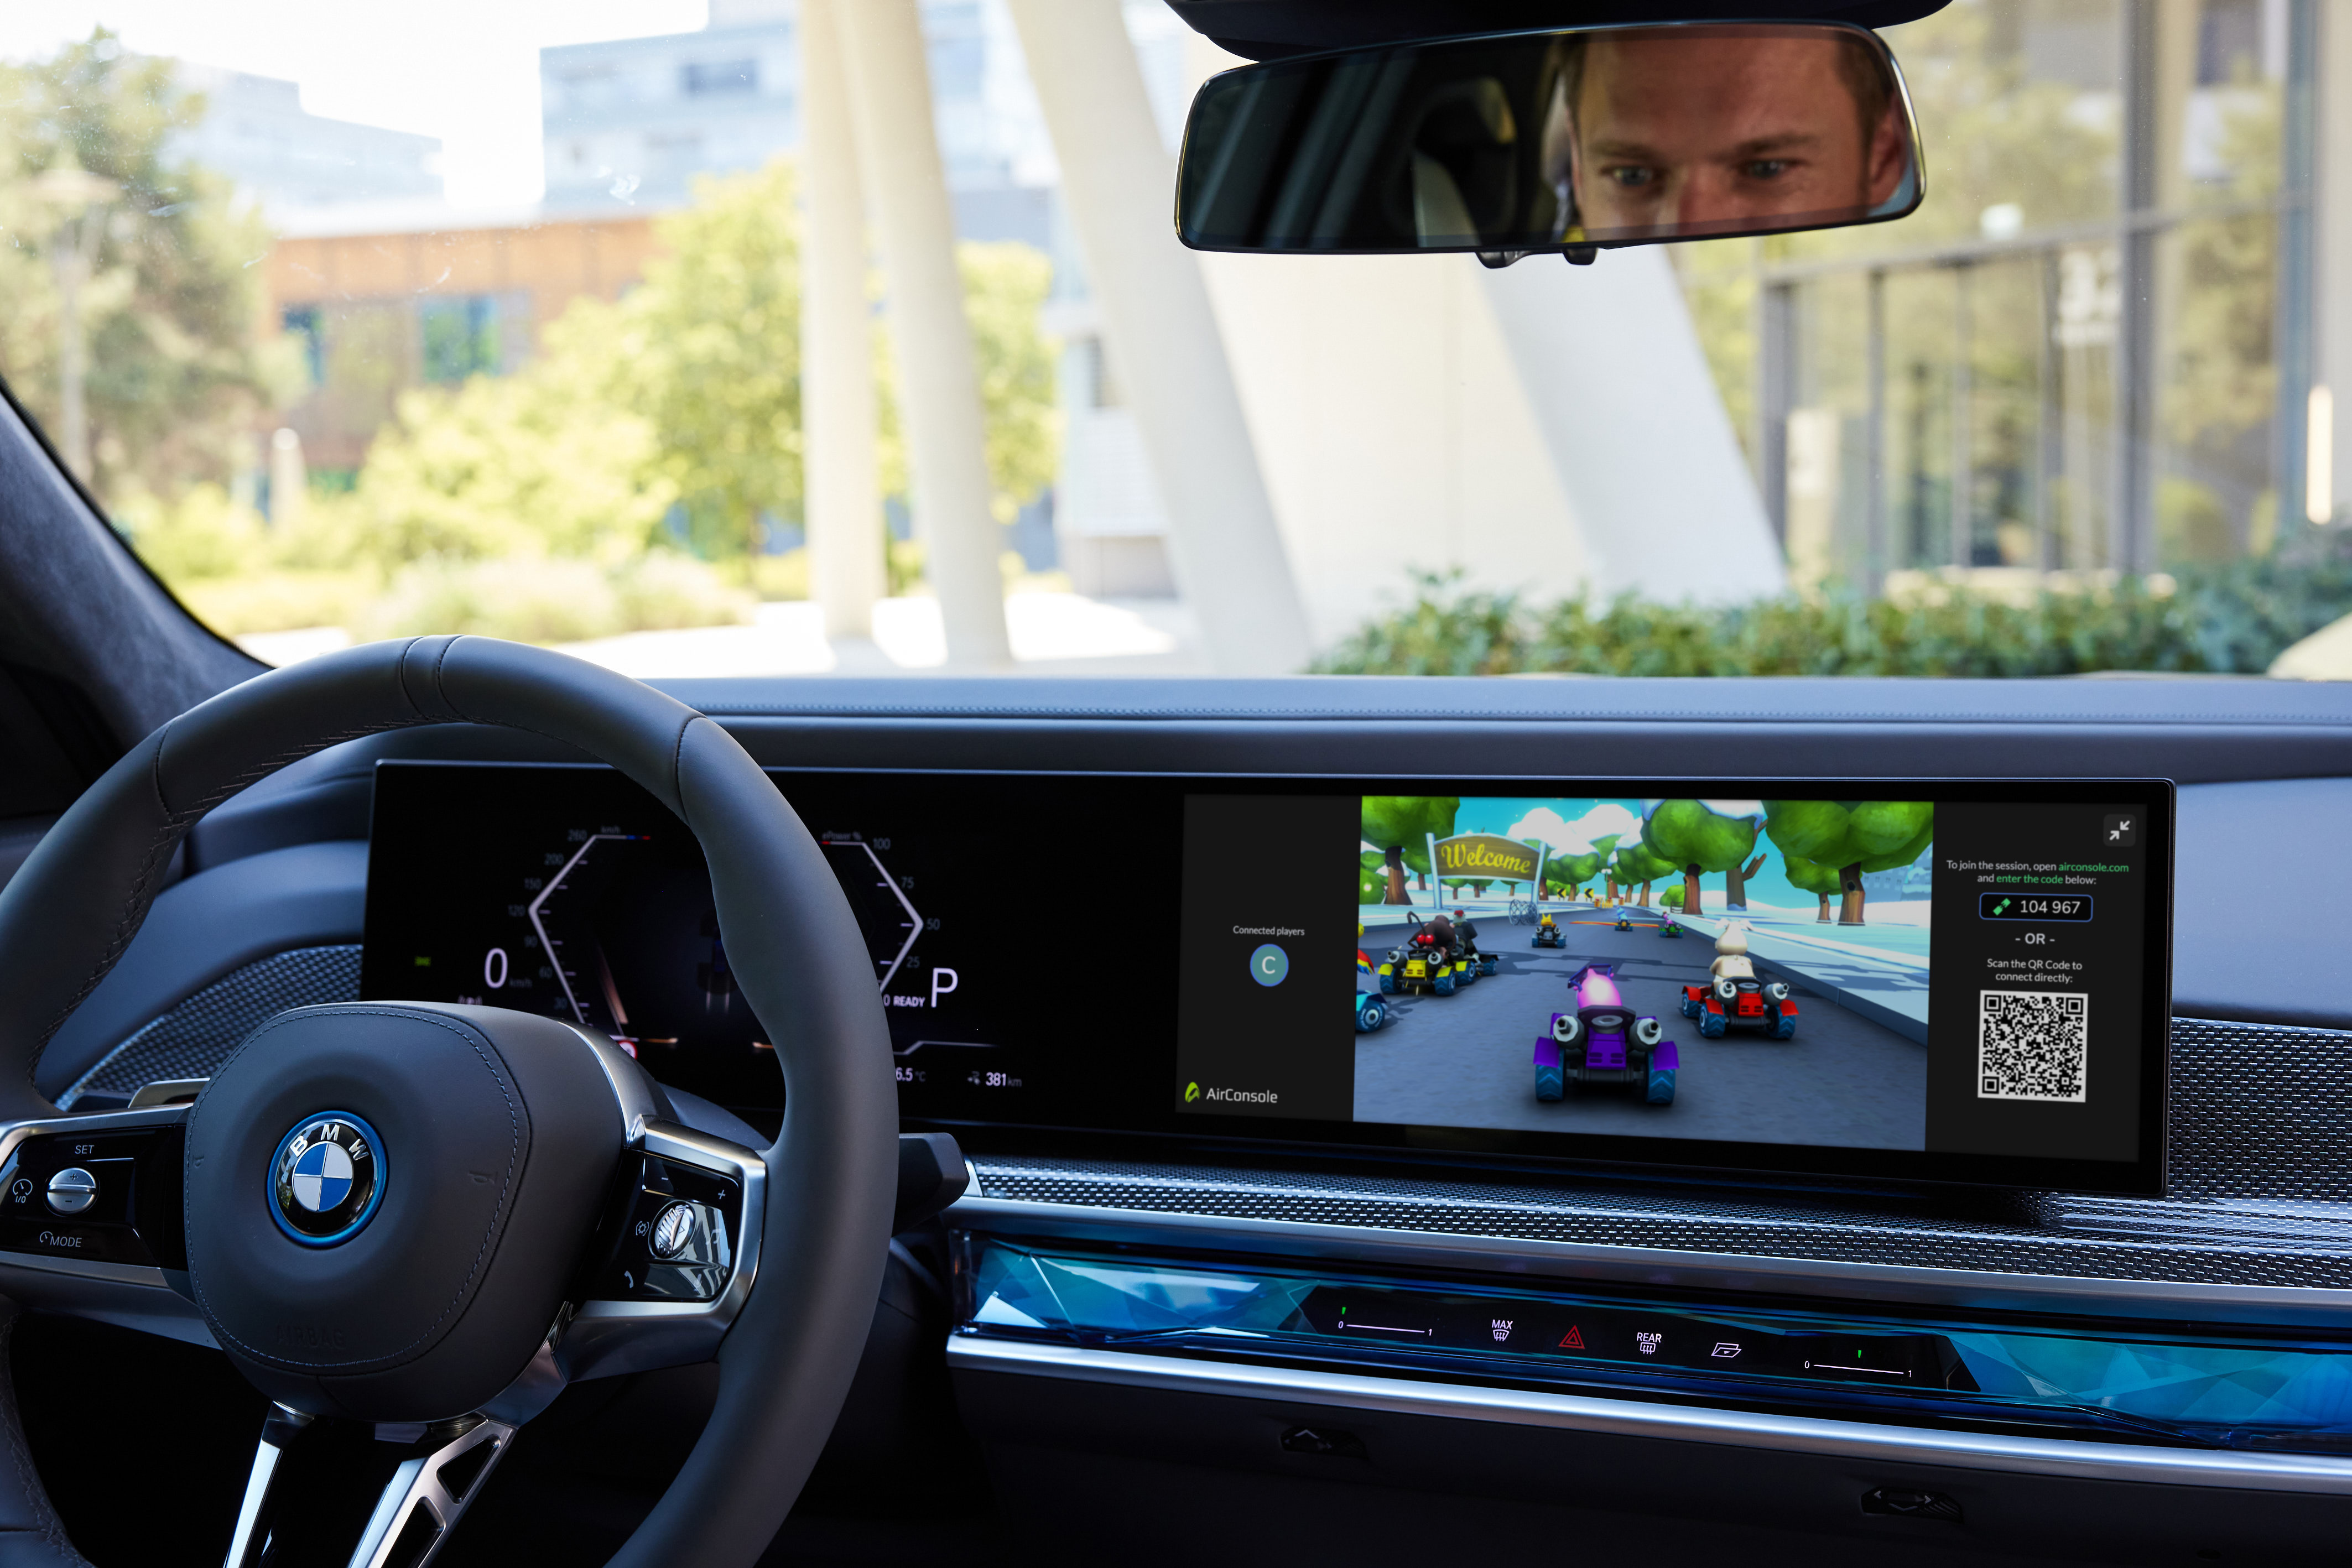 Soon you'll be able to play games in your BMW using a controller